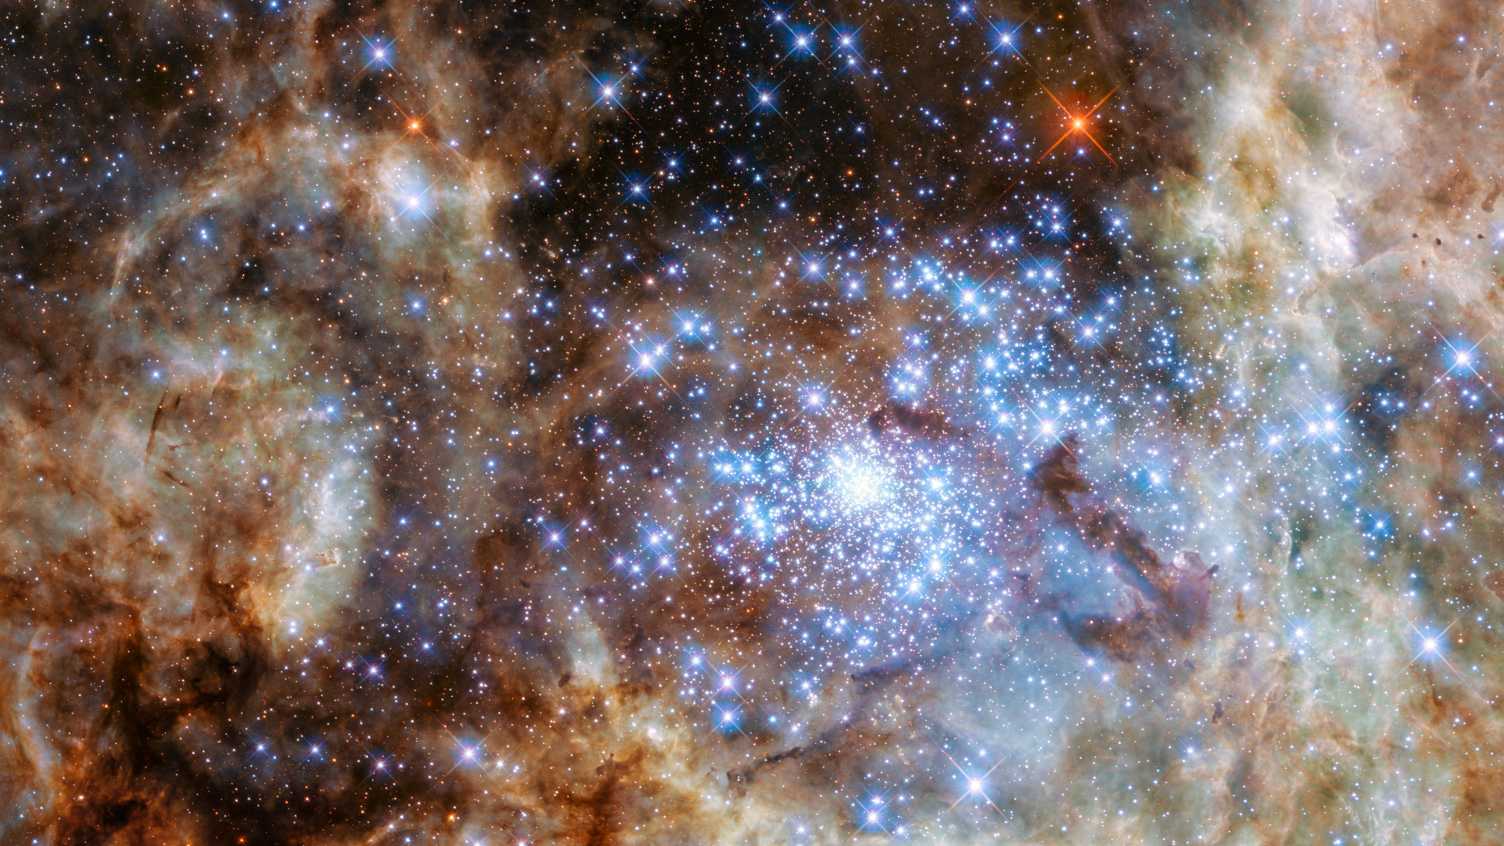 Thumbnail for Hubble Space Telescope unveils monster stars | Physics and Astronomy